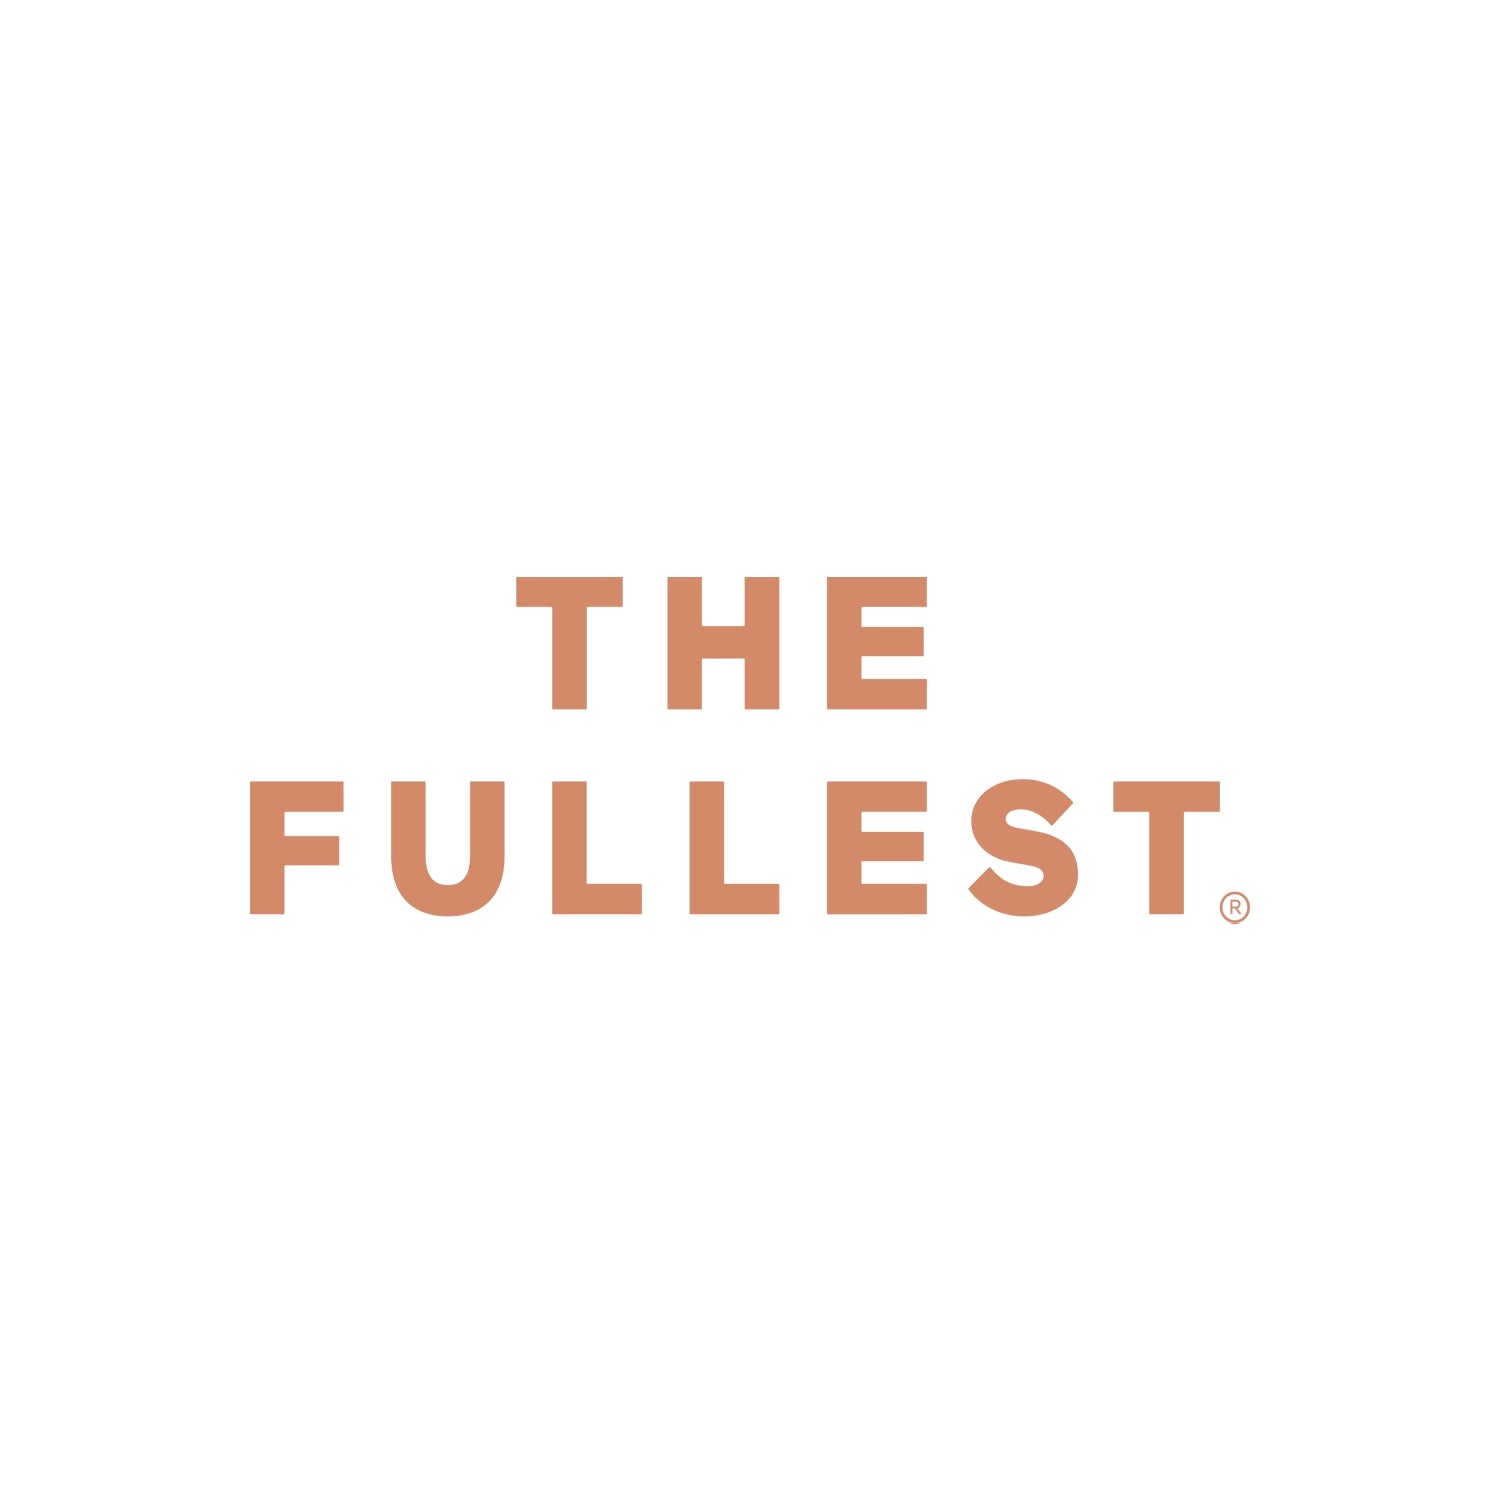 Logo of "THE FULLEST" gift card in minimalist saffron-colored font on a plain off-white background.